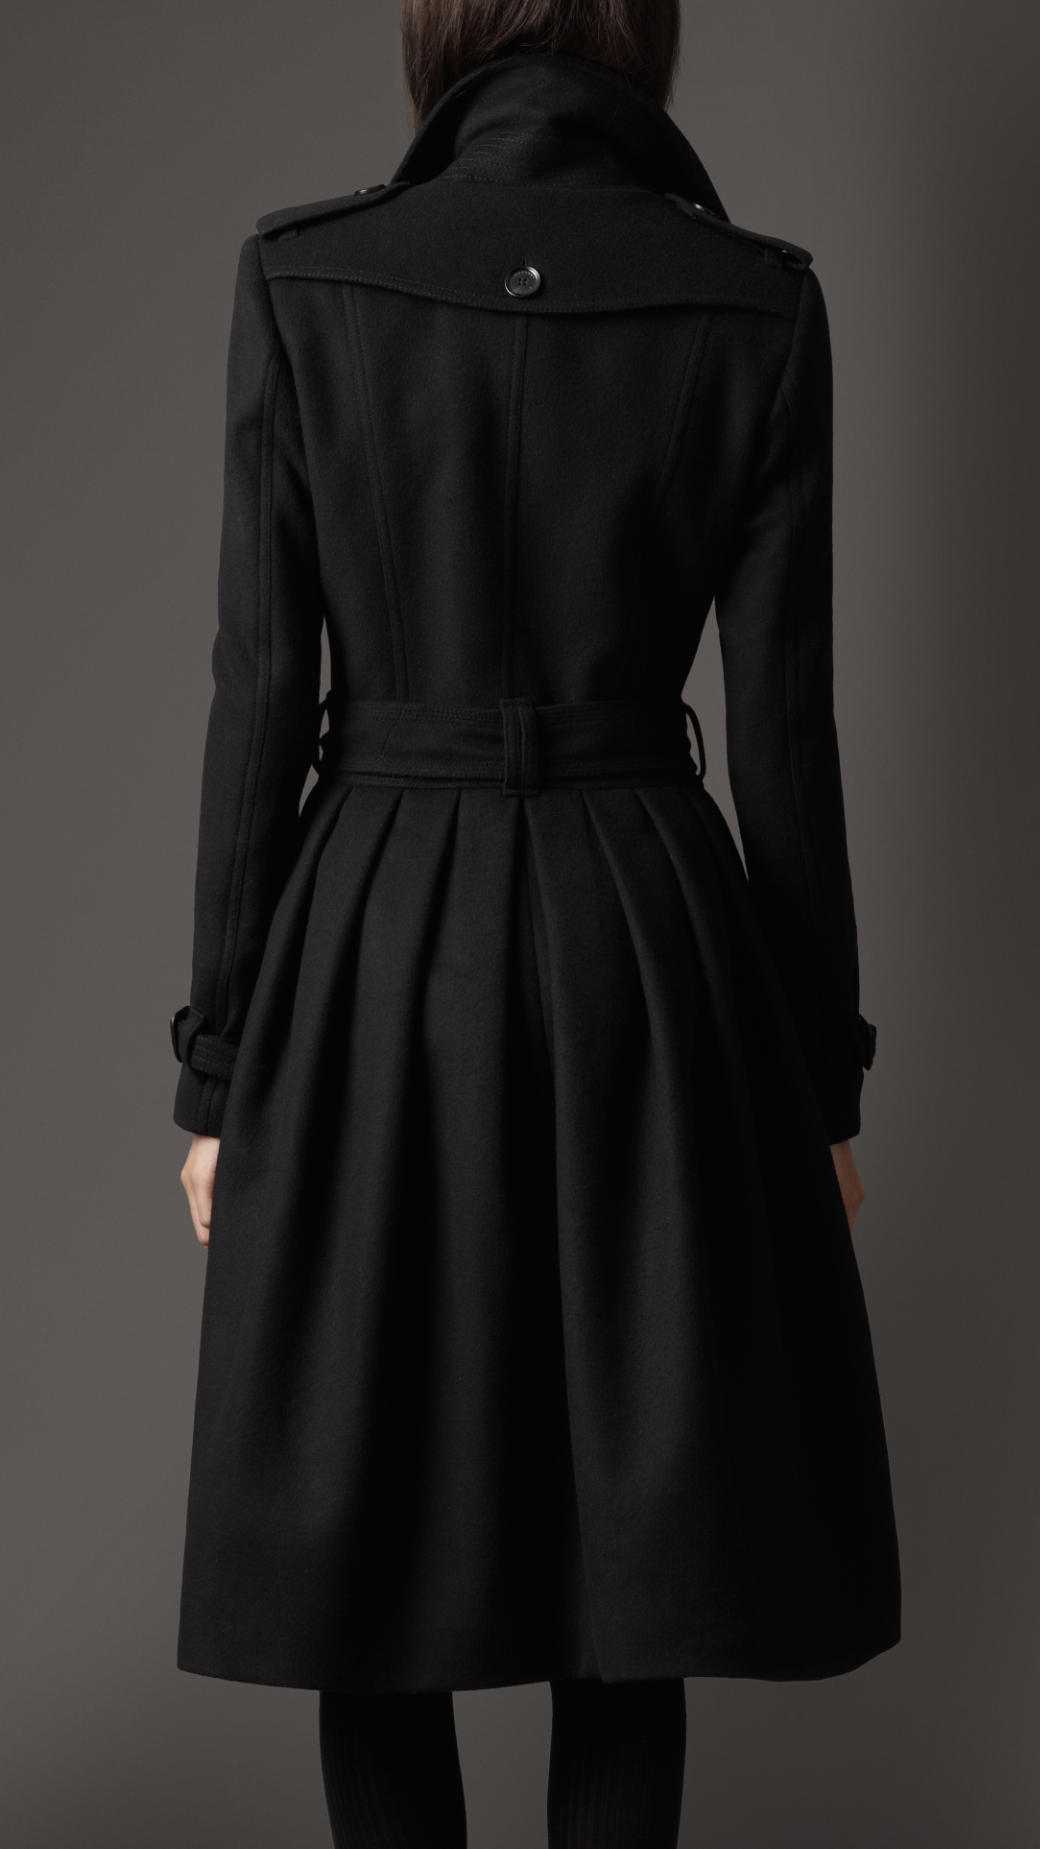 Burberry Full Skirt Virgin Wool and Cashmere Coat in Black - Lyst